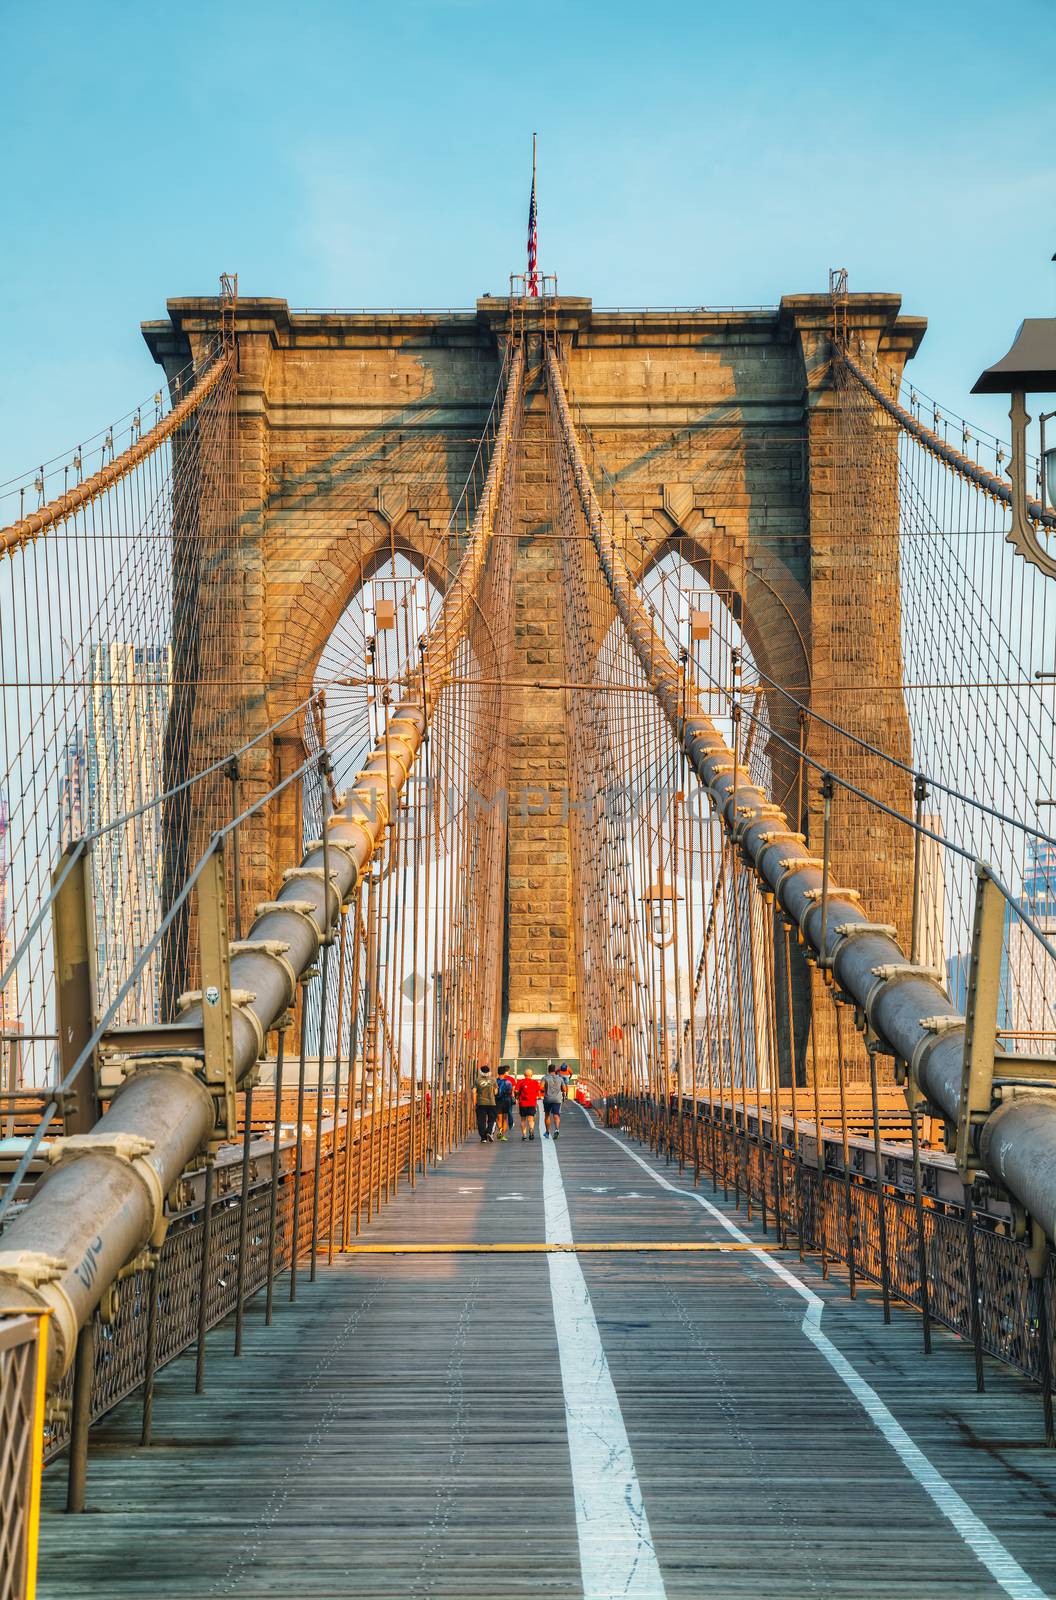 NEW YORK CITY - SEPTEMBER 3: Brooklyn bridge on September 3, 2015 in New York City. It's a bridge in New York City and is one of the oldest suspension bridges in the US.